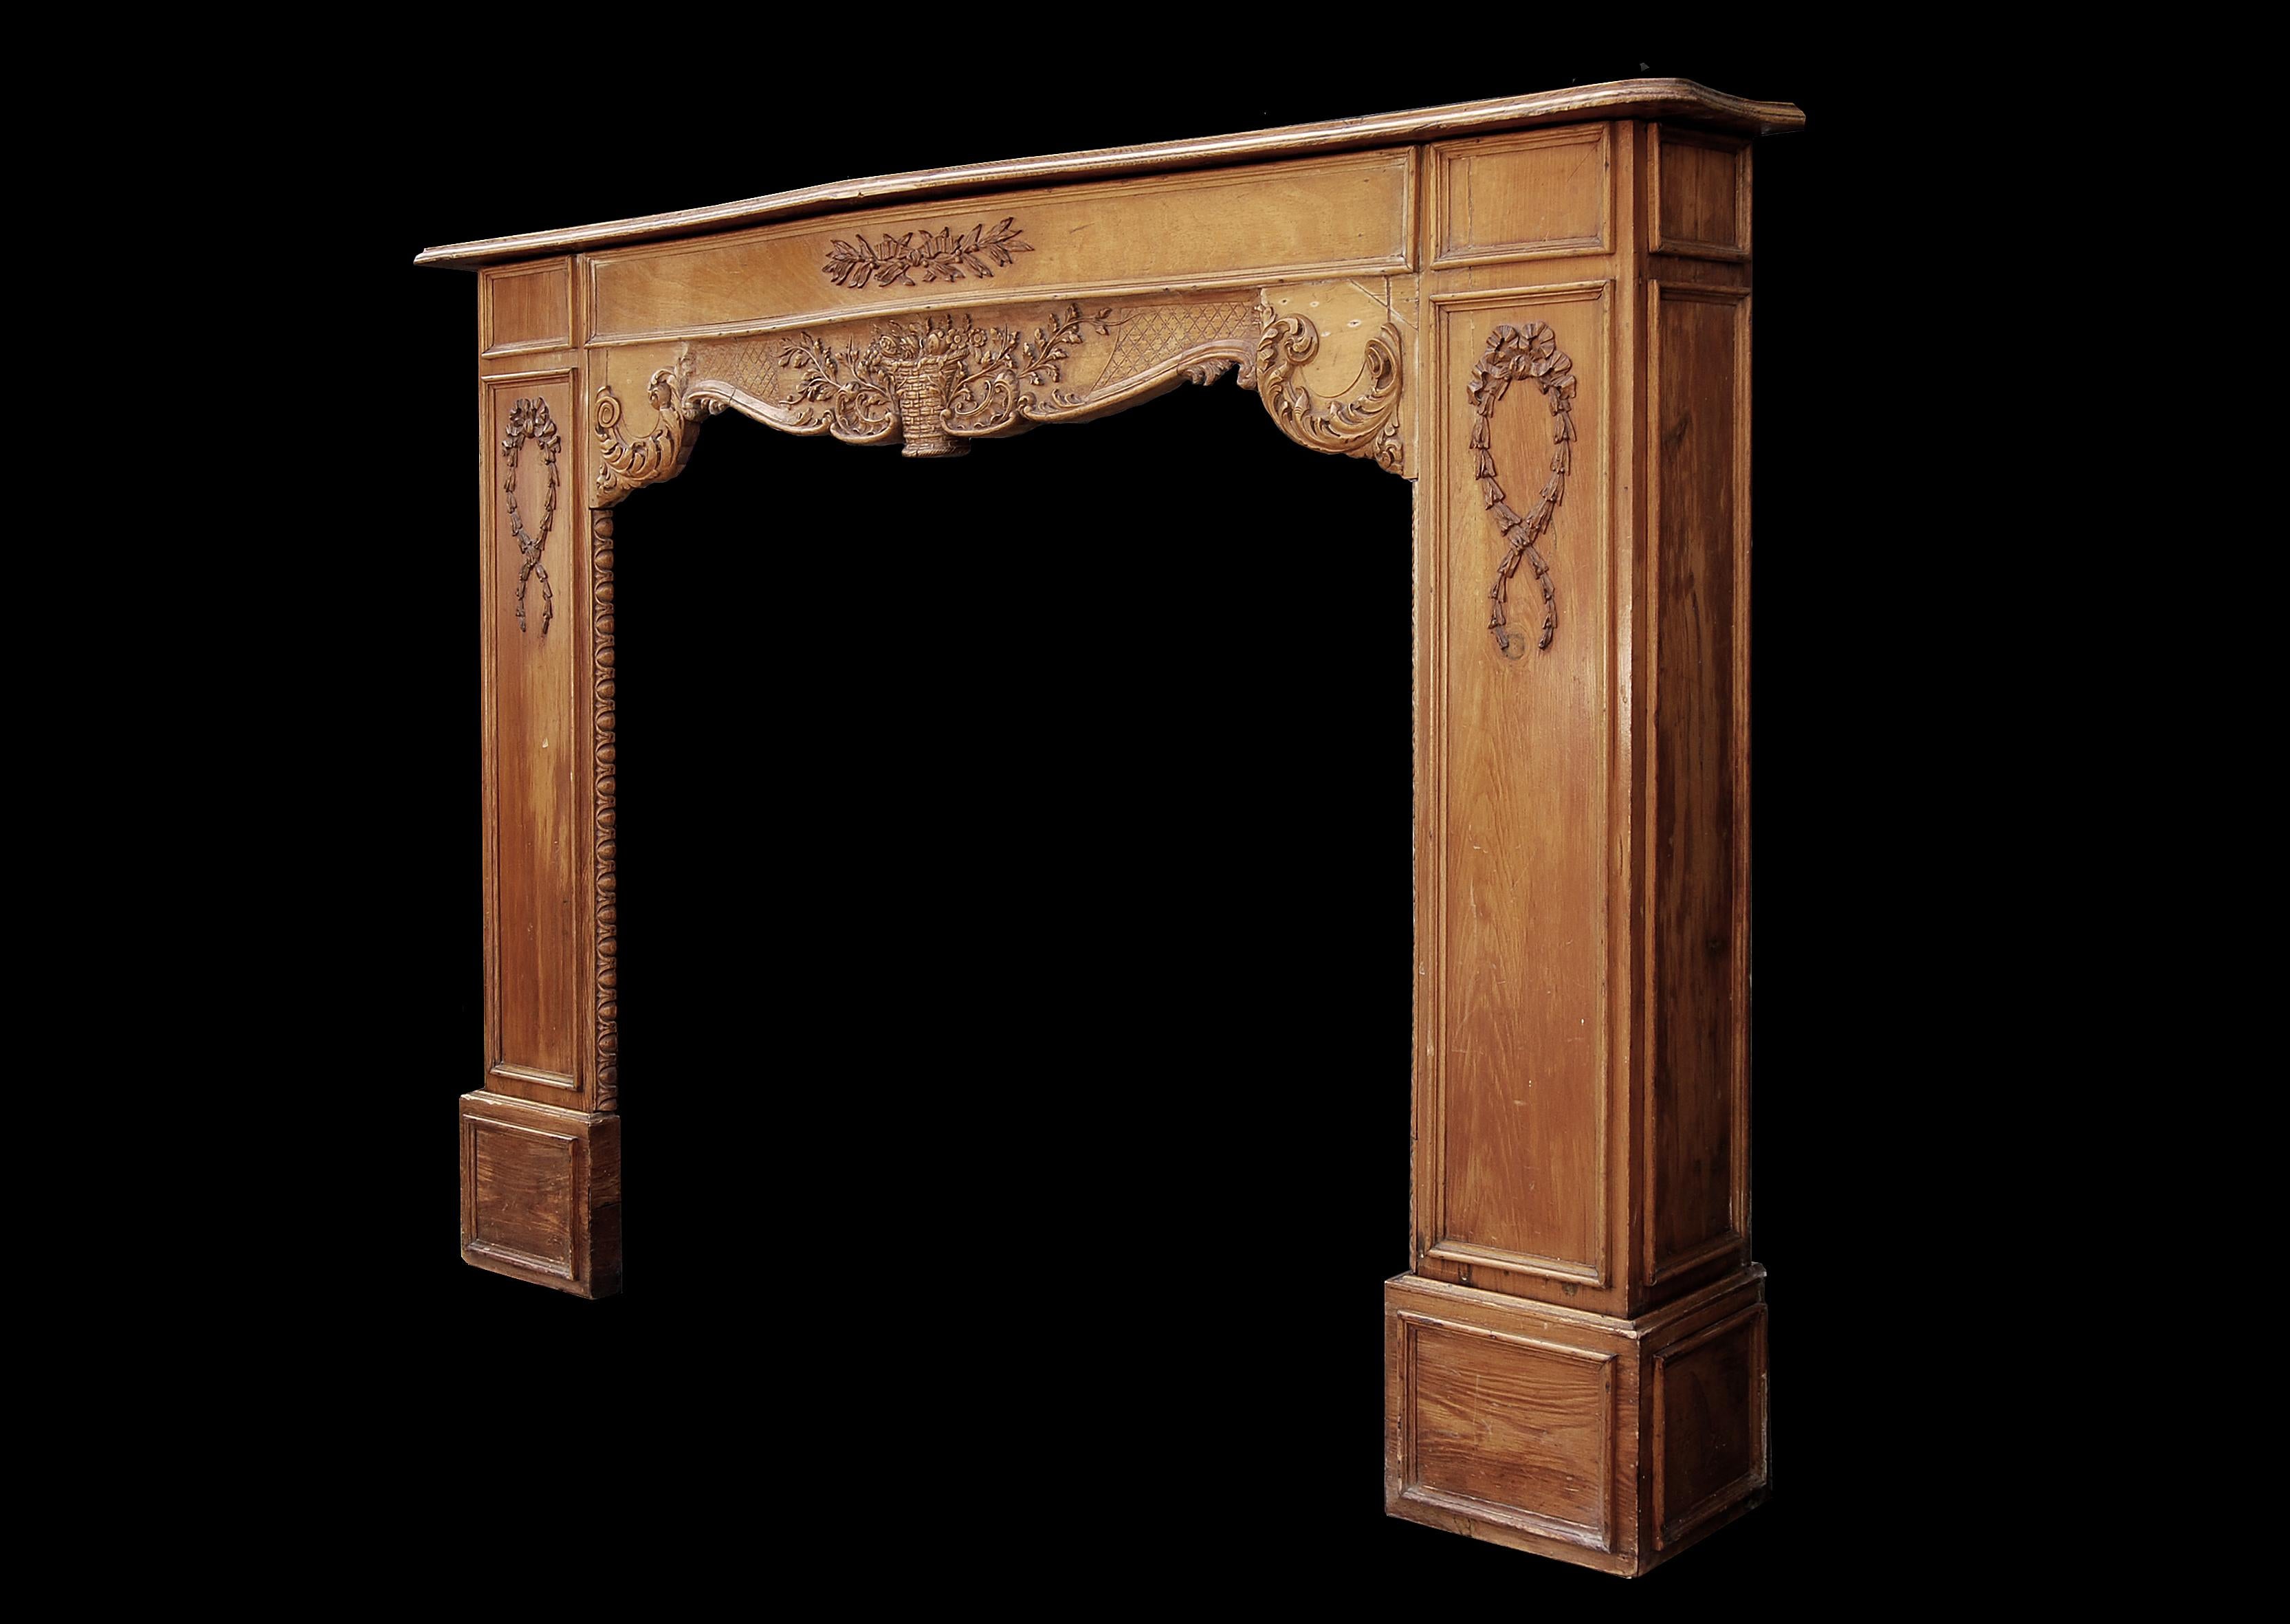 19th Century Late 19th-Early 20th Century English Carved Wood Fireplace For Sale